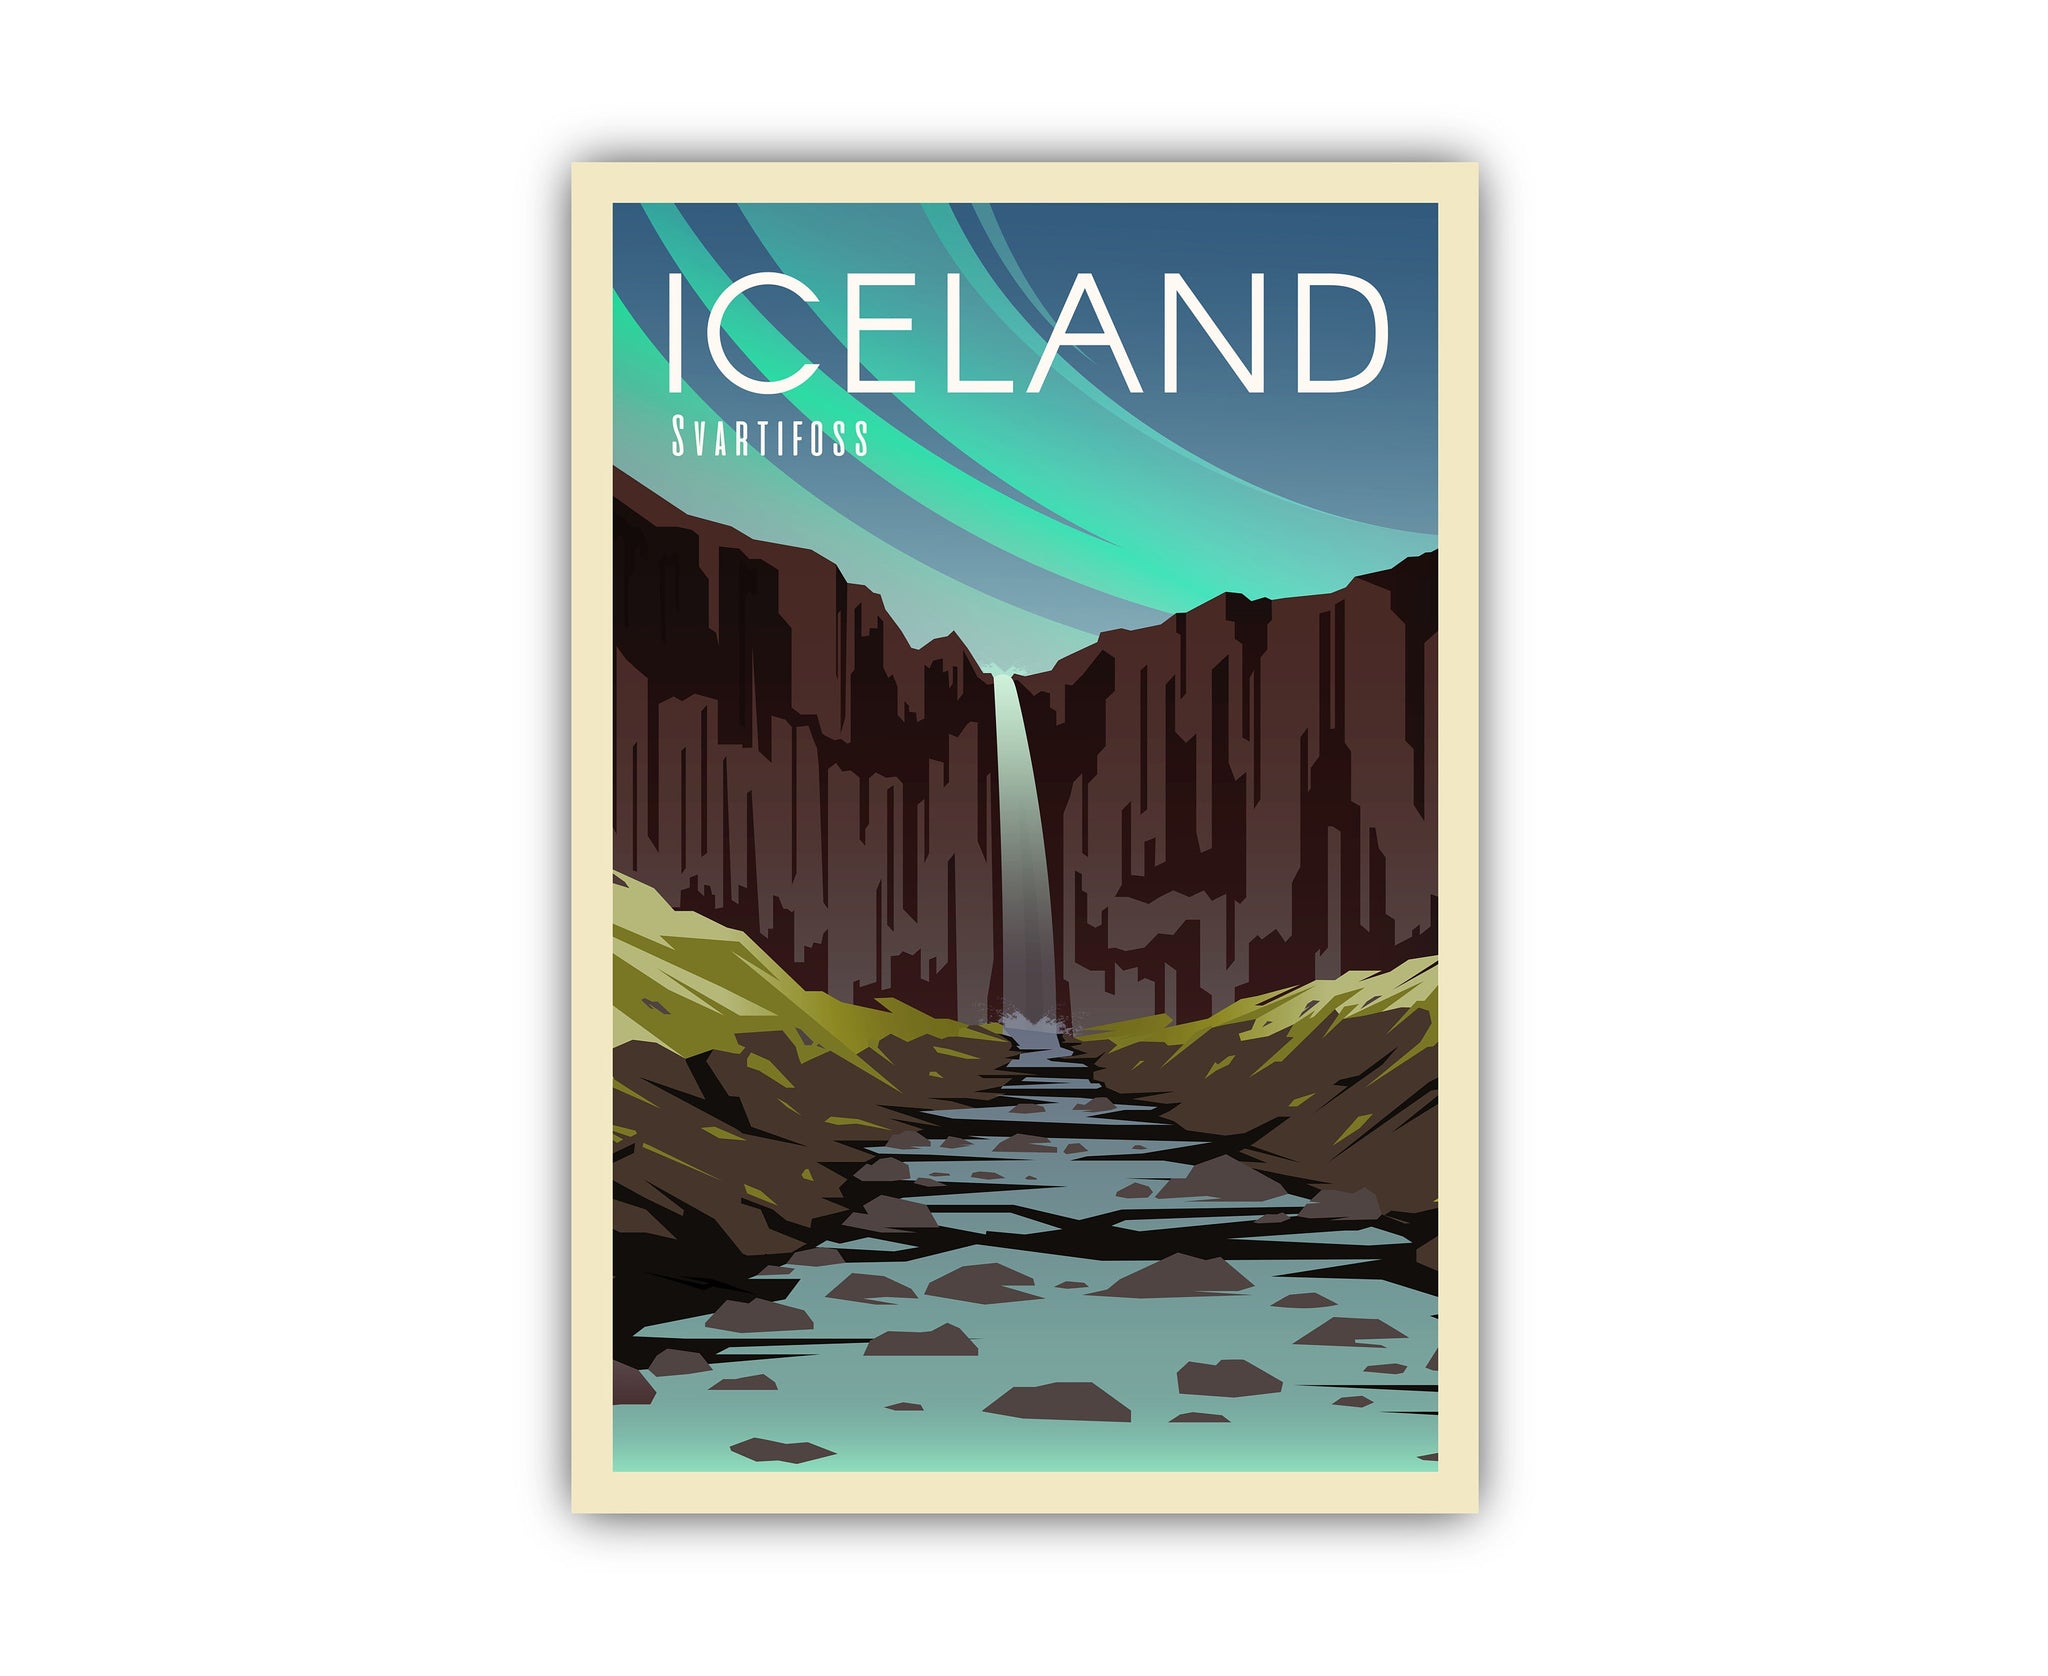 Iceland Vintage Rustic Poster Print, Retro Style Travel Poster